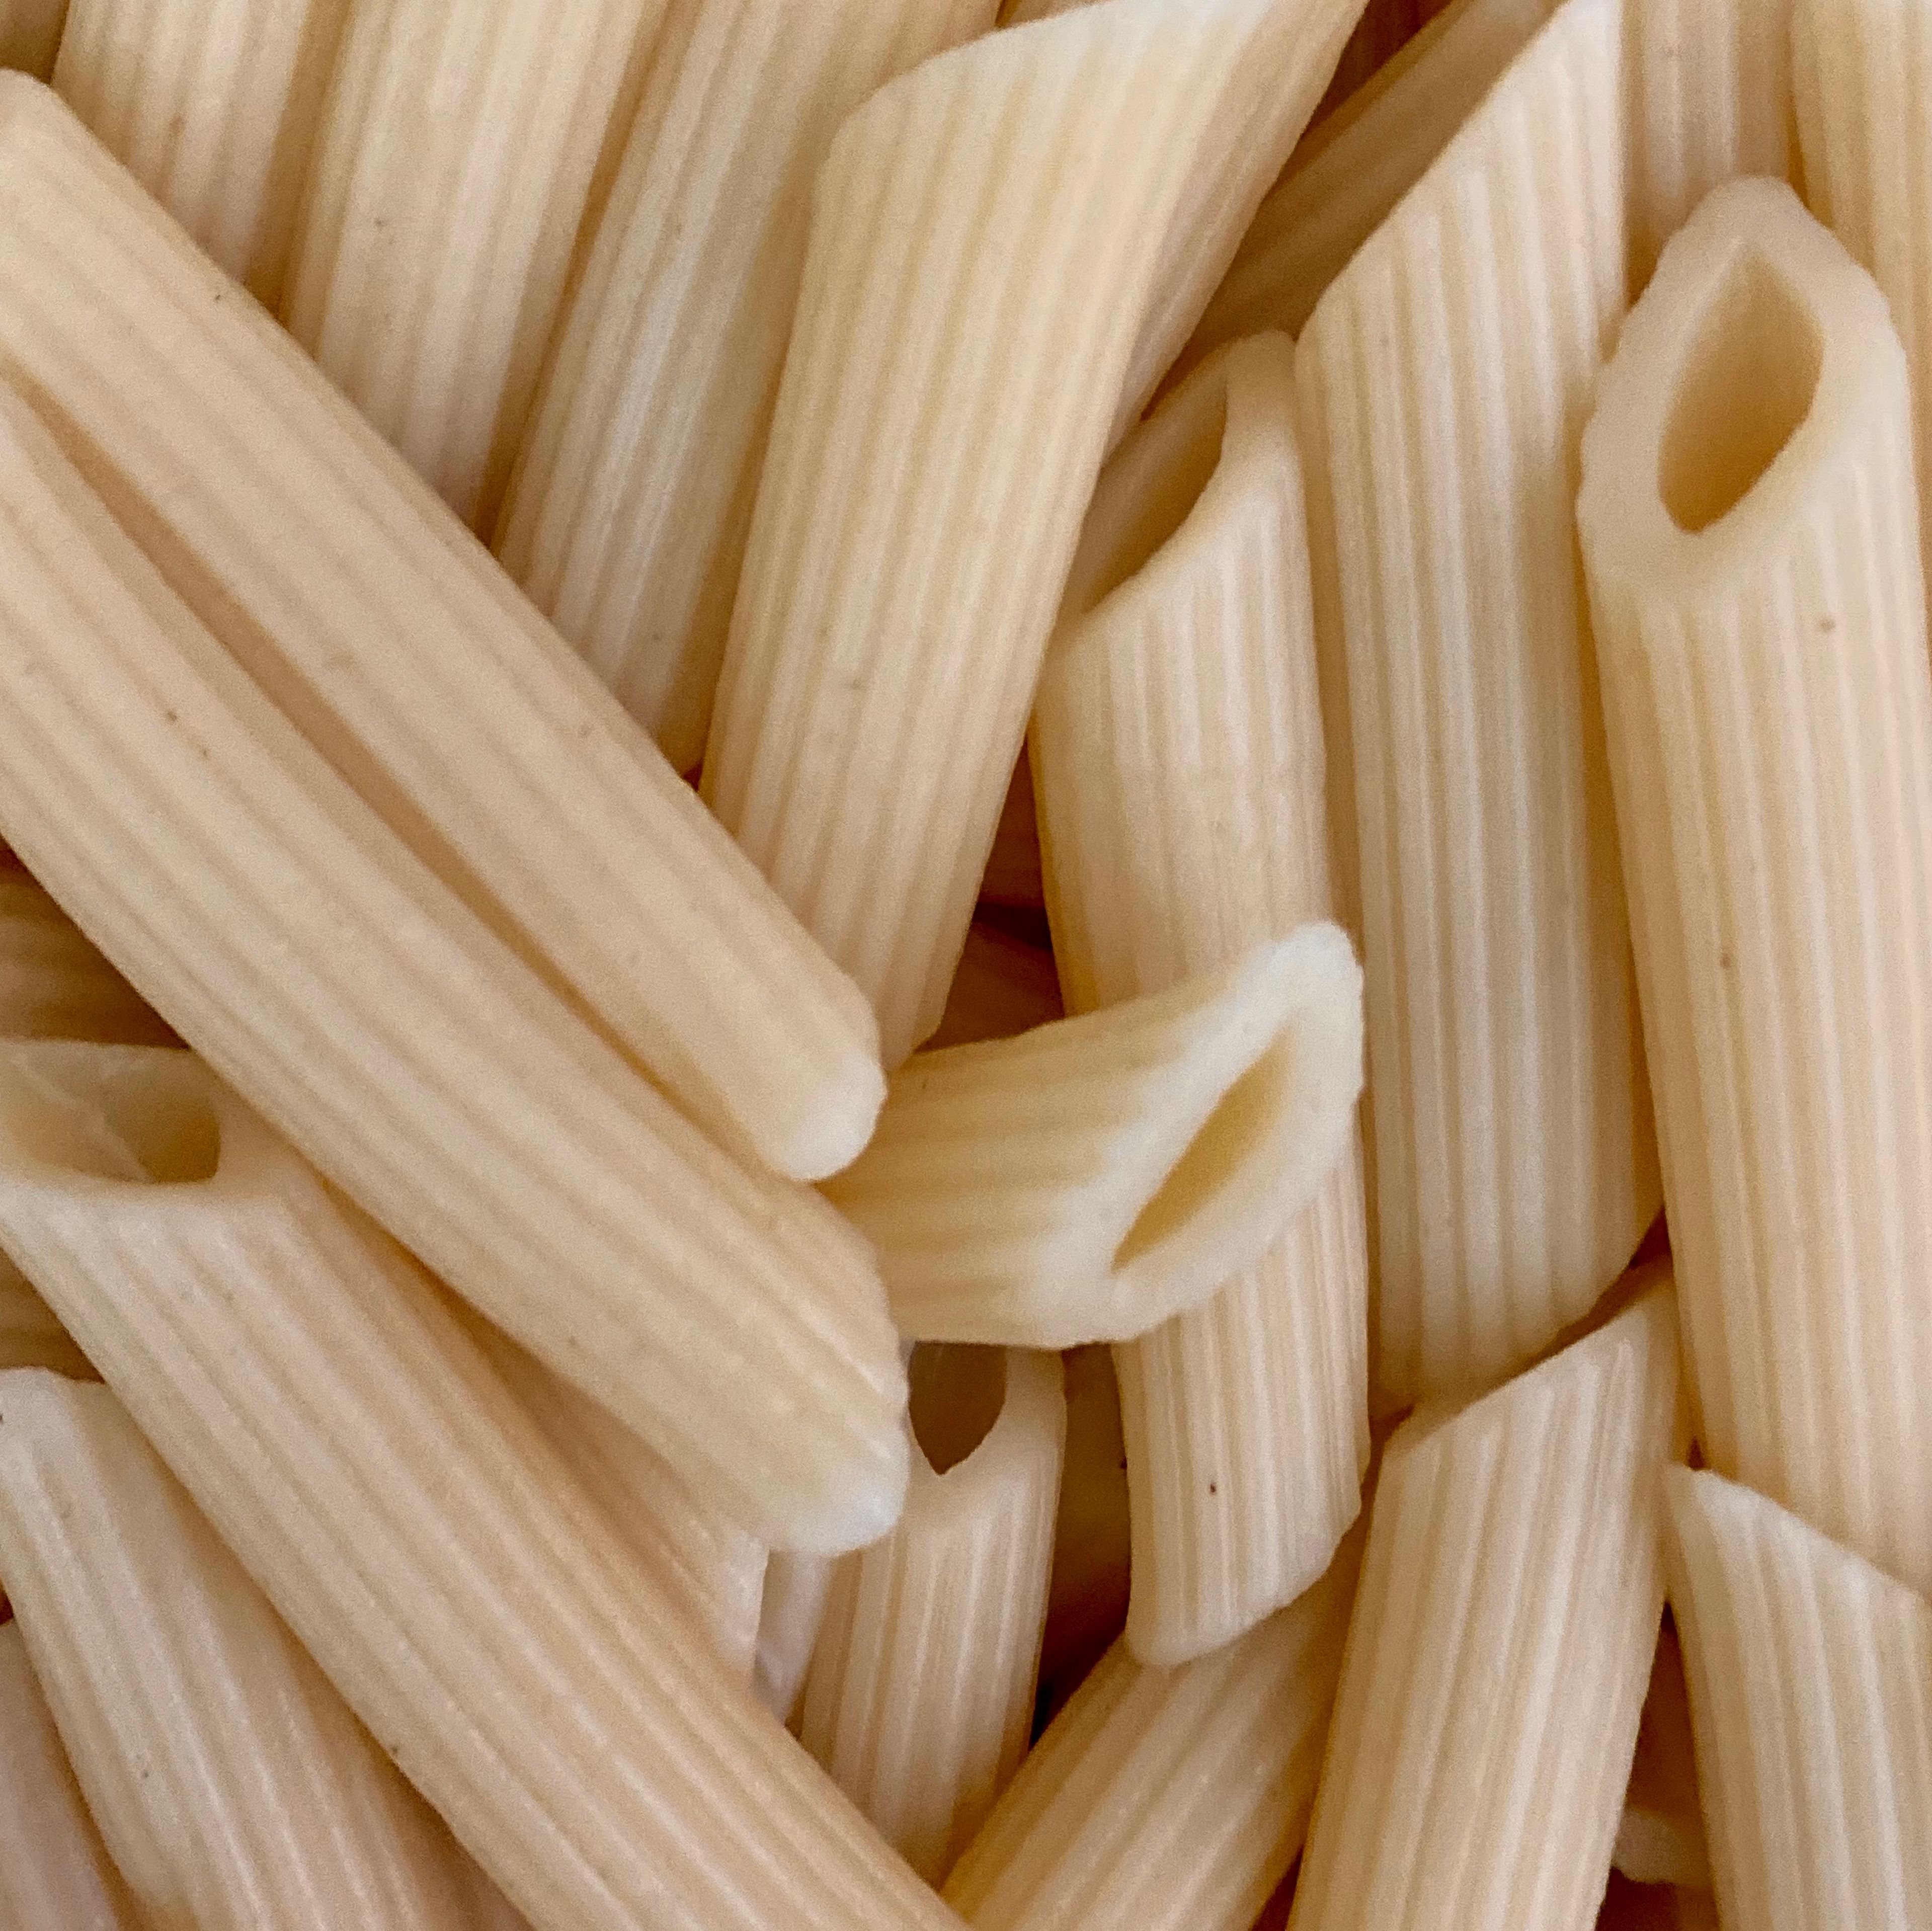 Bring water to boil and pinch of salt. Cook your pasta at around 10 - 13 minutes. Drain under cold water to stop the cooking process. Put aside with a good splash of olive oil, this will keep the pasta non sticky.